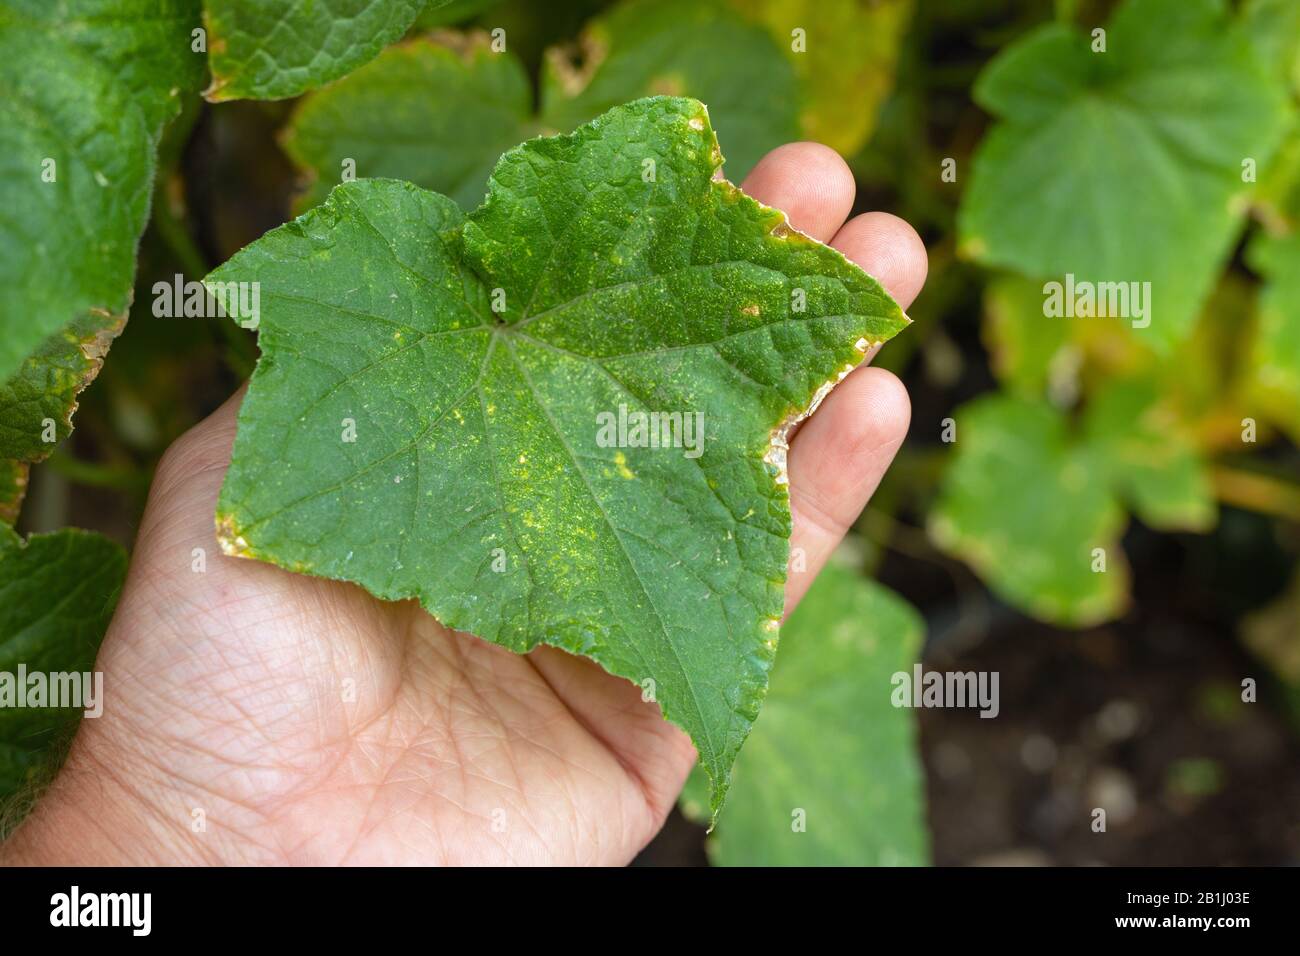 Sick cucumber leaves with yellowed edges due to lesions of disease Plant sickness in agriculture, horticulture and home gardening. Stock Photo